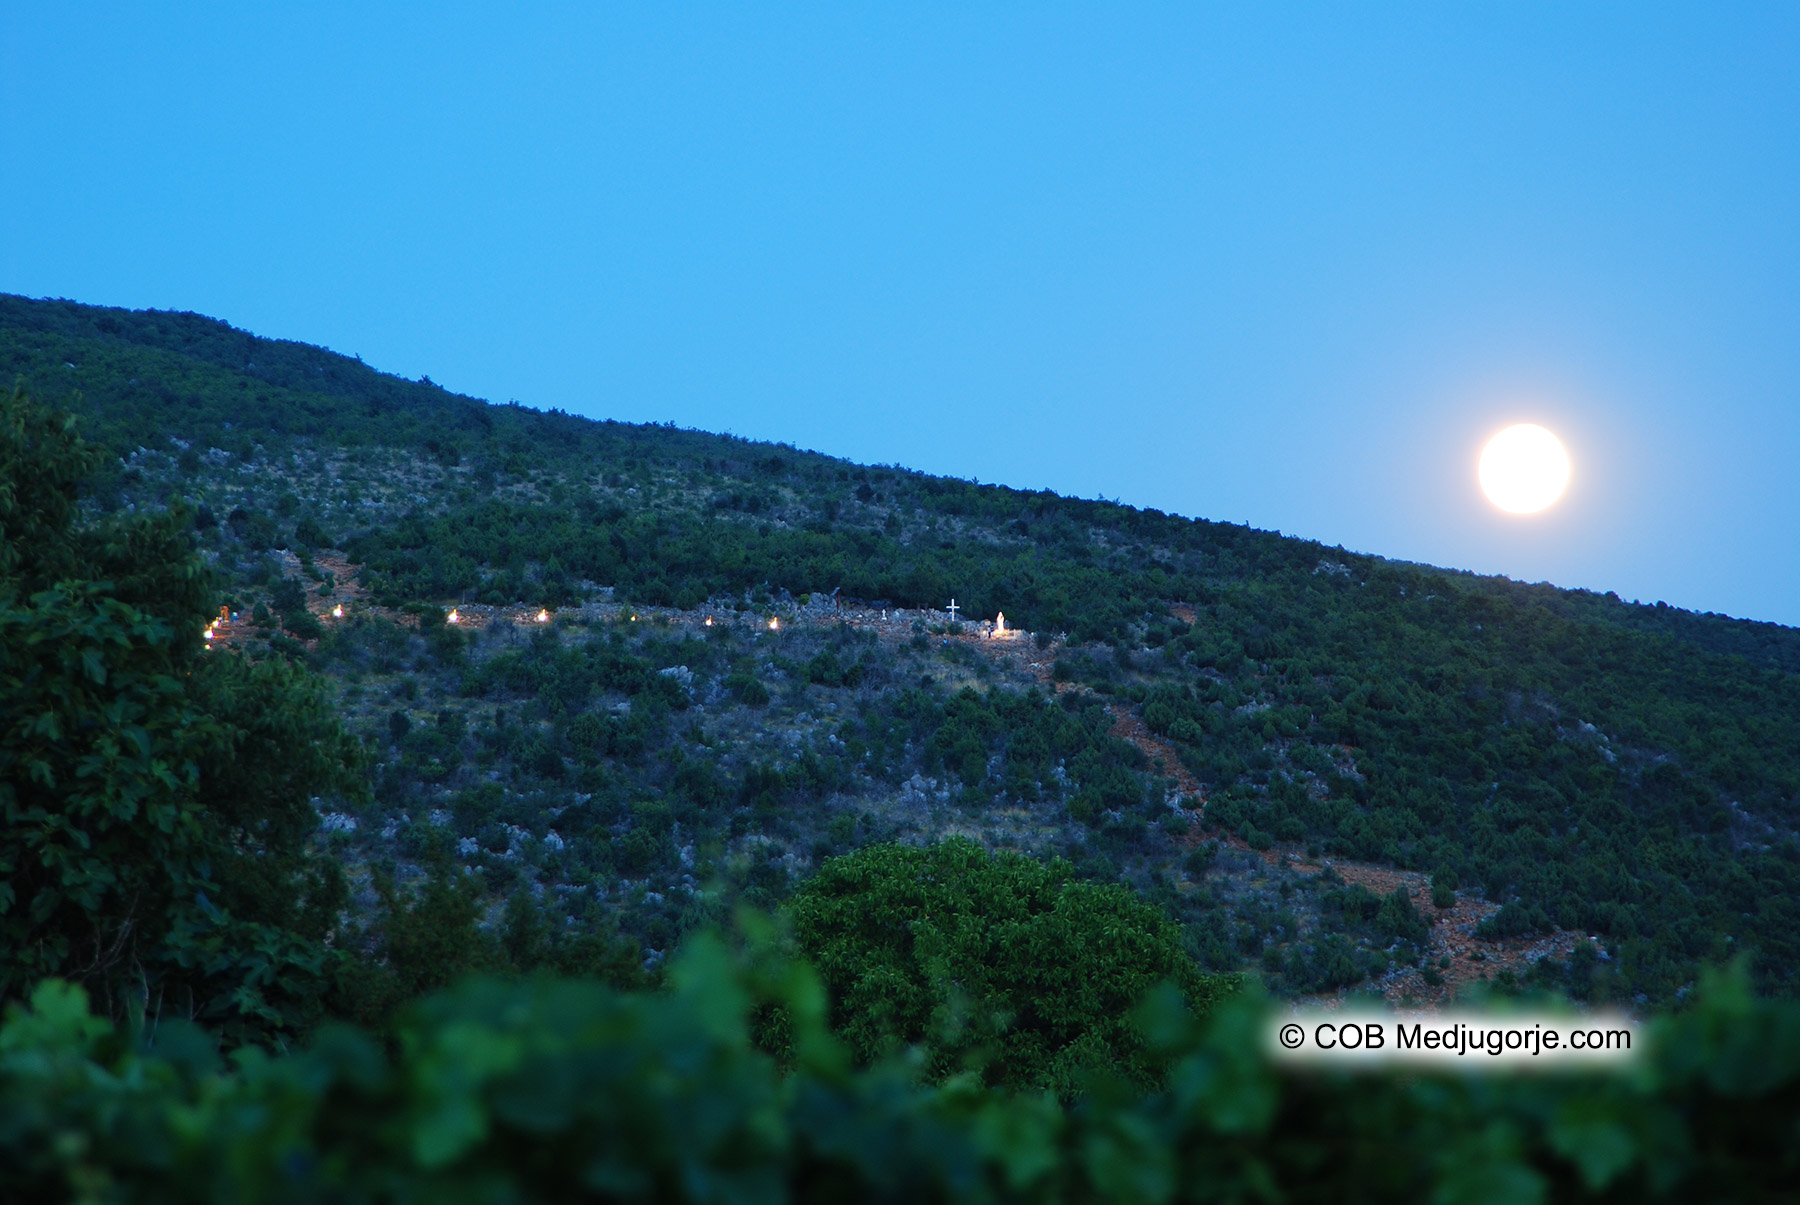 The moon shines over Apparition Mountain in Medjugorje